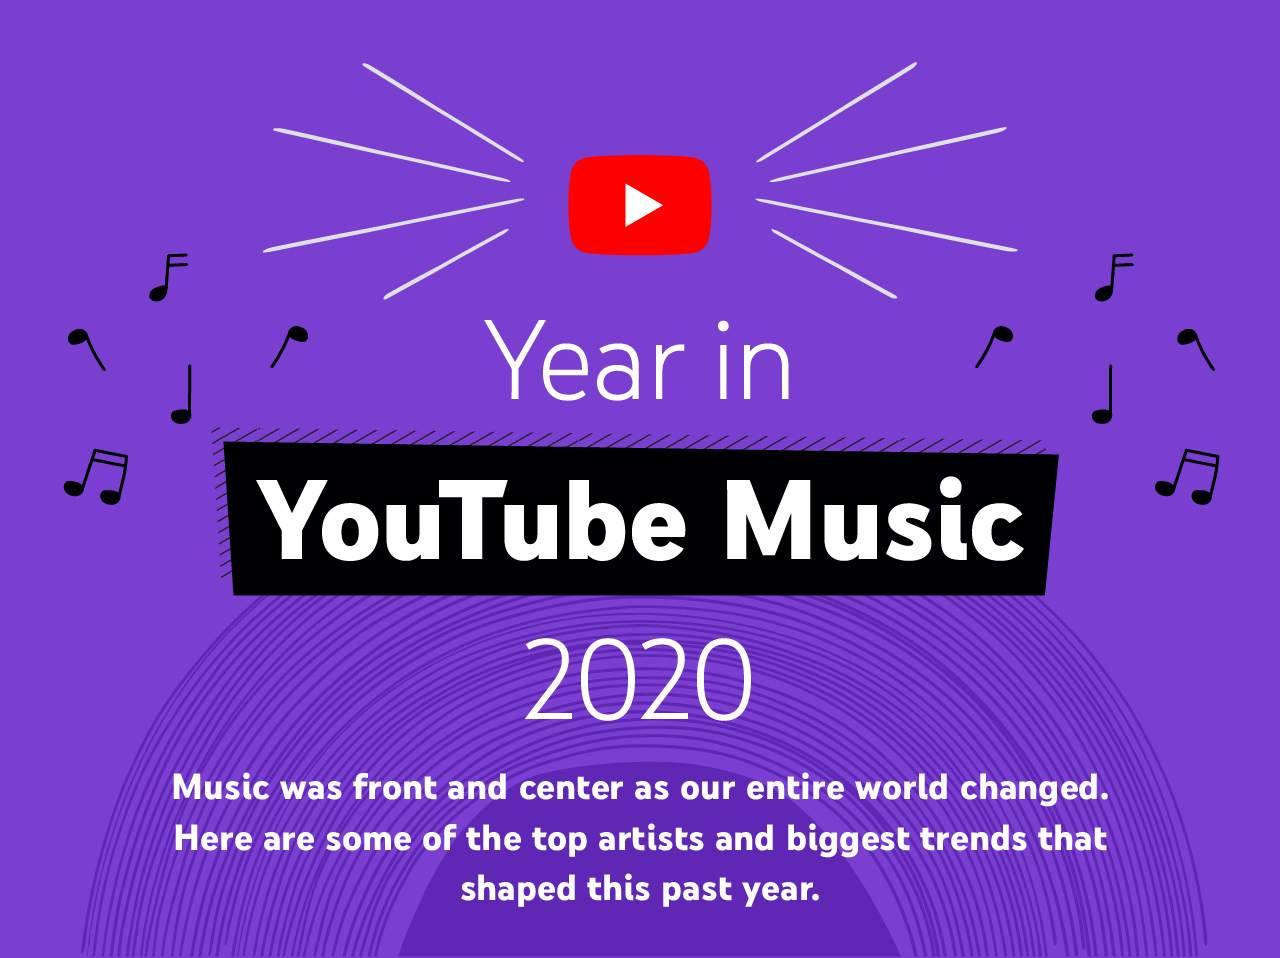 YouTube announce their biggest music trends and moments in 2020